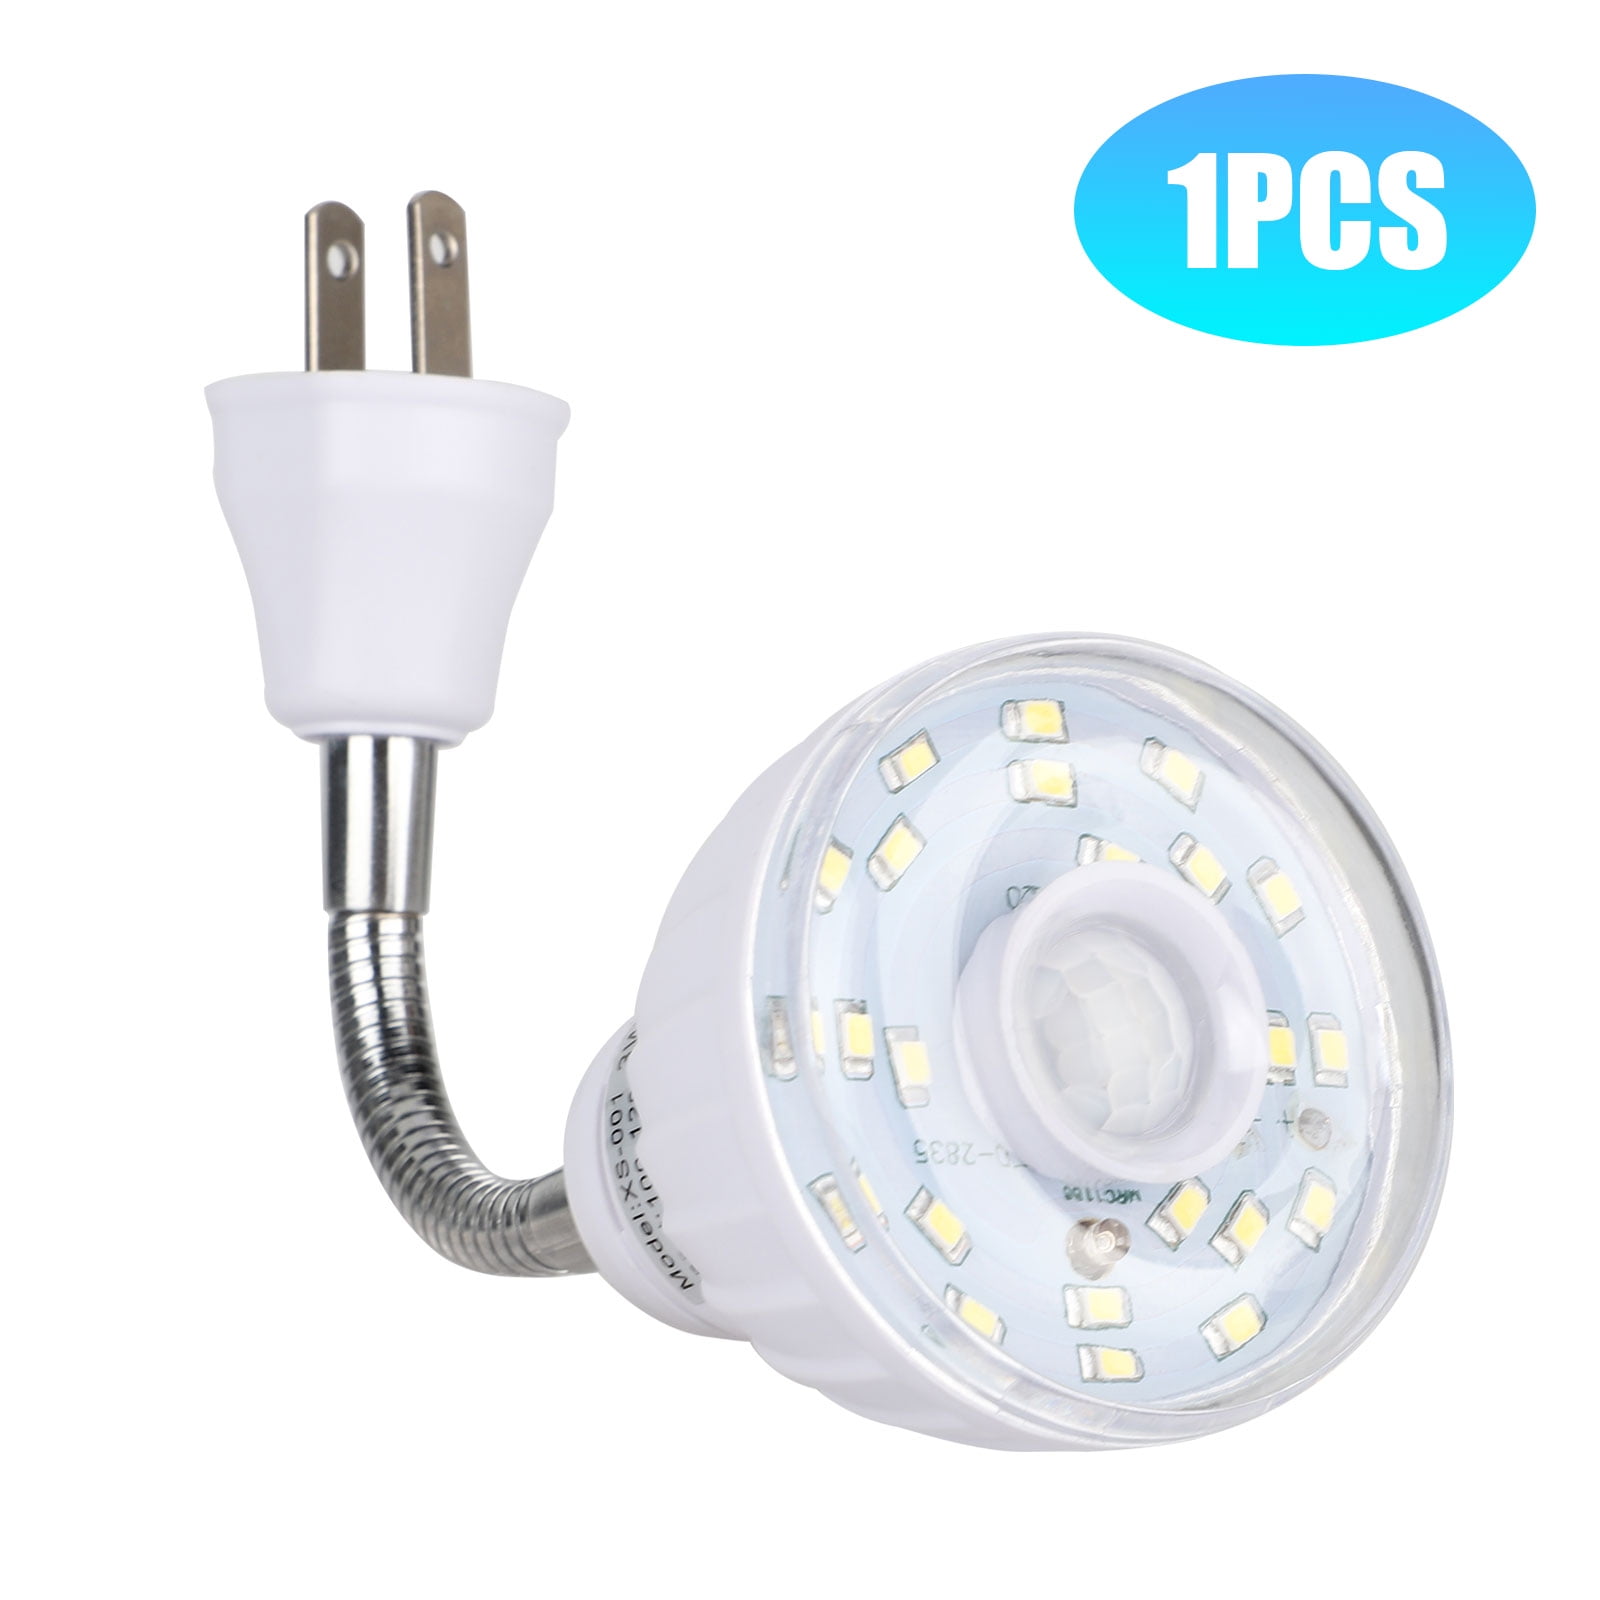 LED Night Light Plug in Auto Sensor Control pack of 2 for bedroom hallway white 